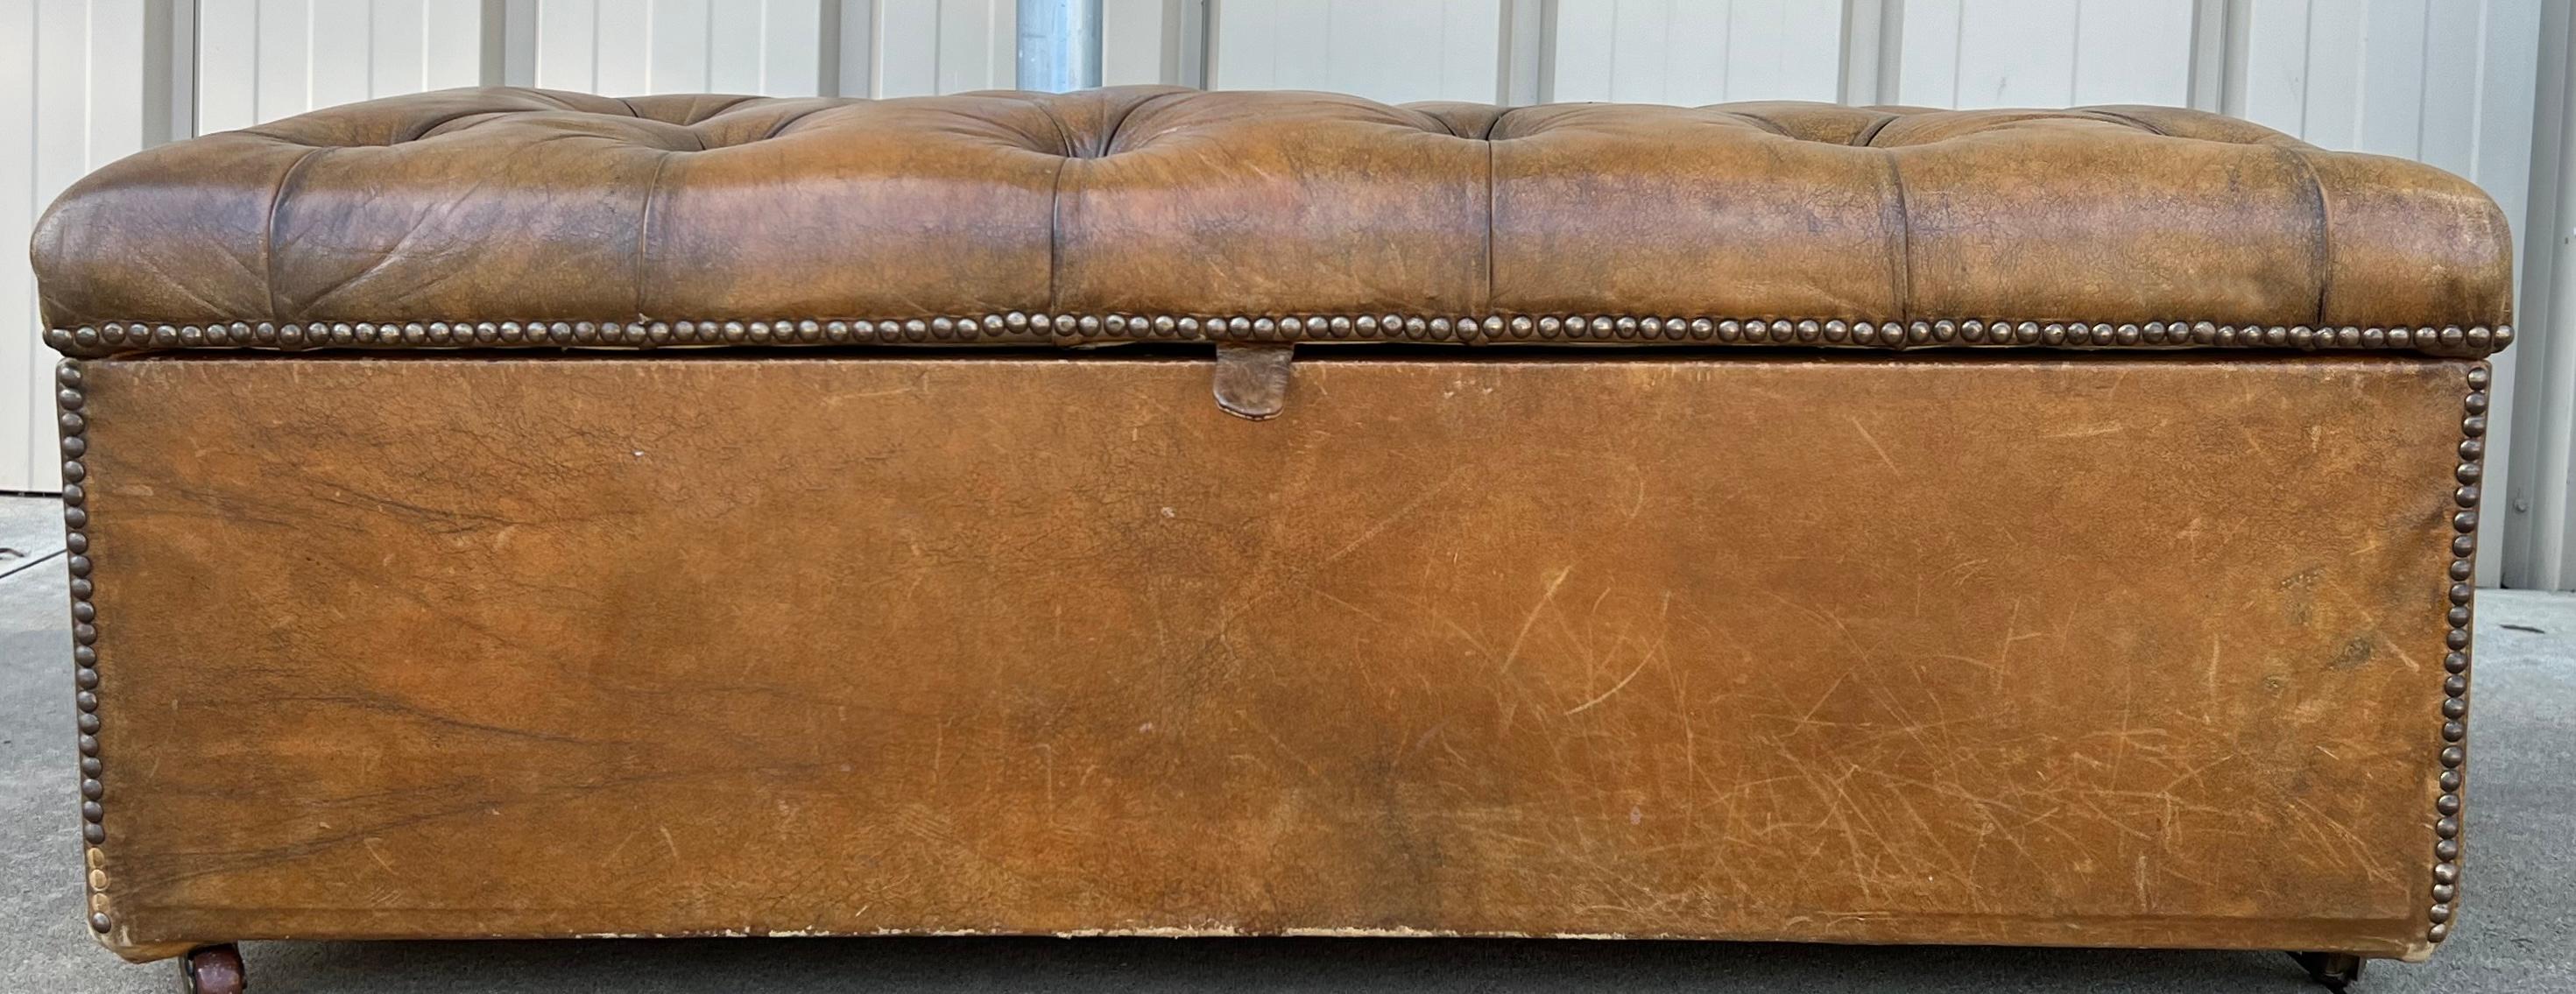 1940s English Leather Chesterfield Style Bench / Coffee Table with Storage 5